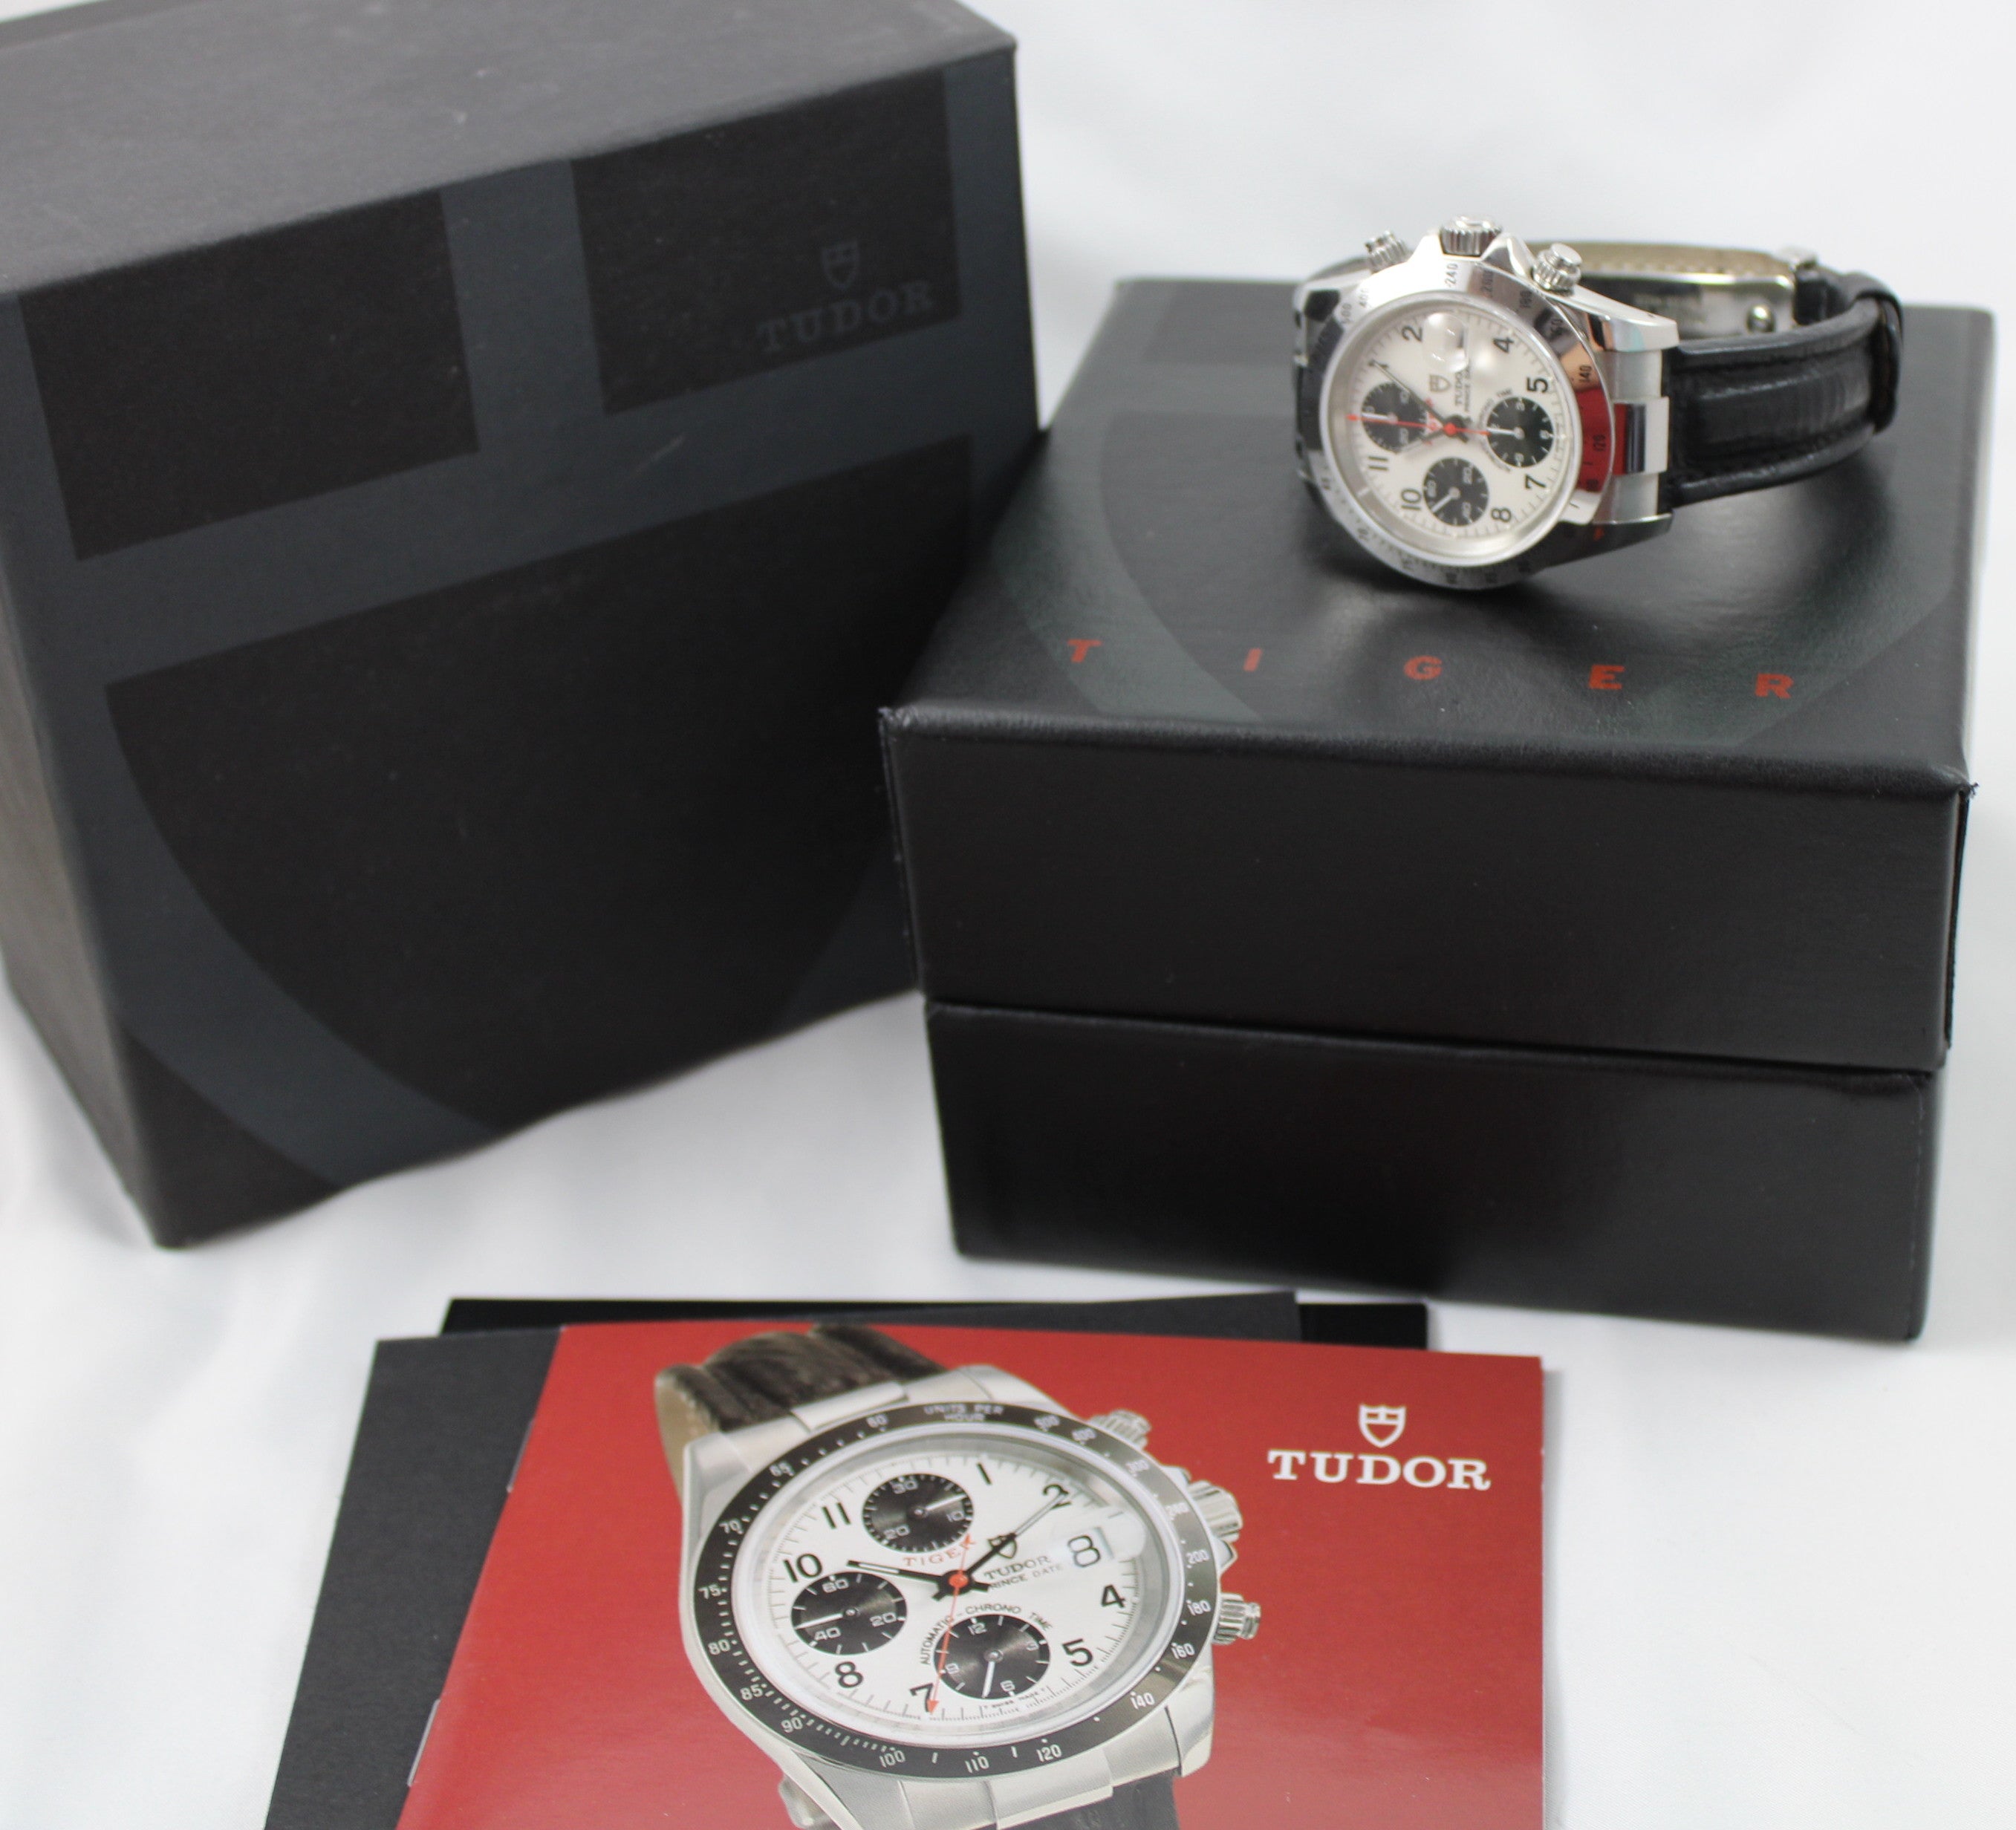 Tudor Prince Date Tiger 79280 Automatic Chronograph Stainless Watch